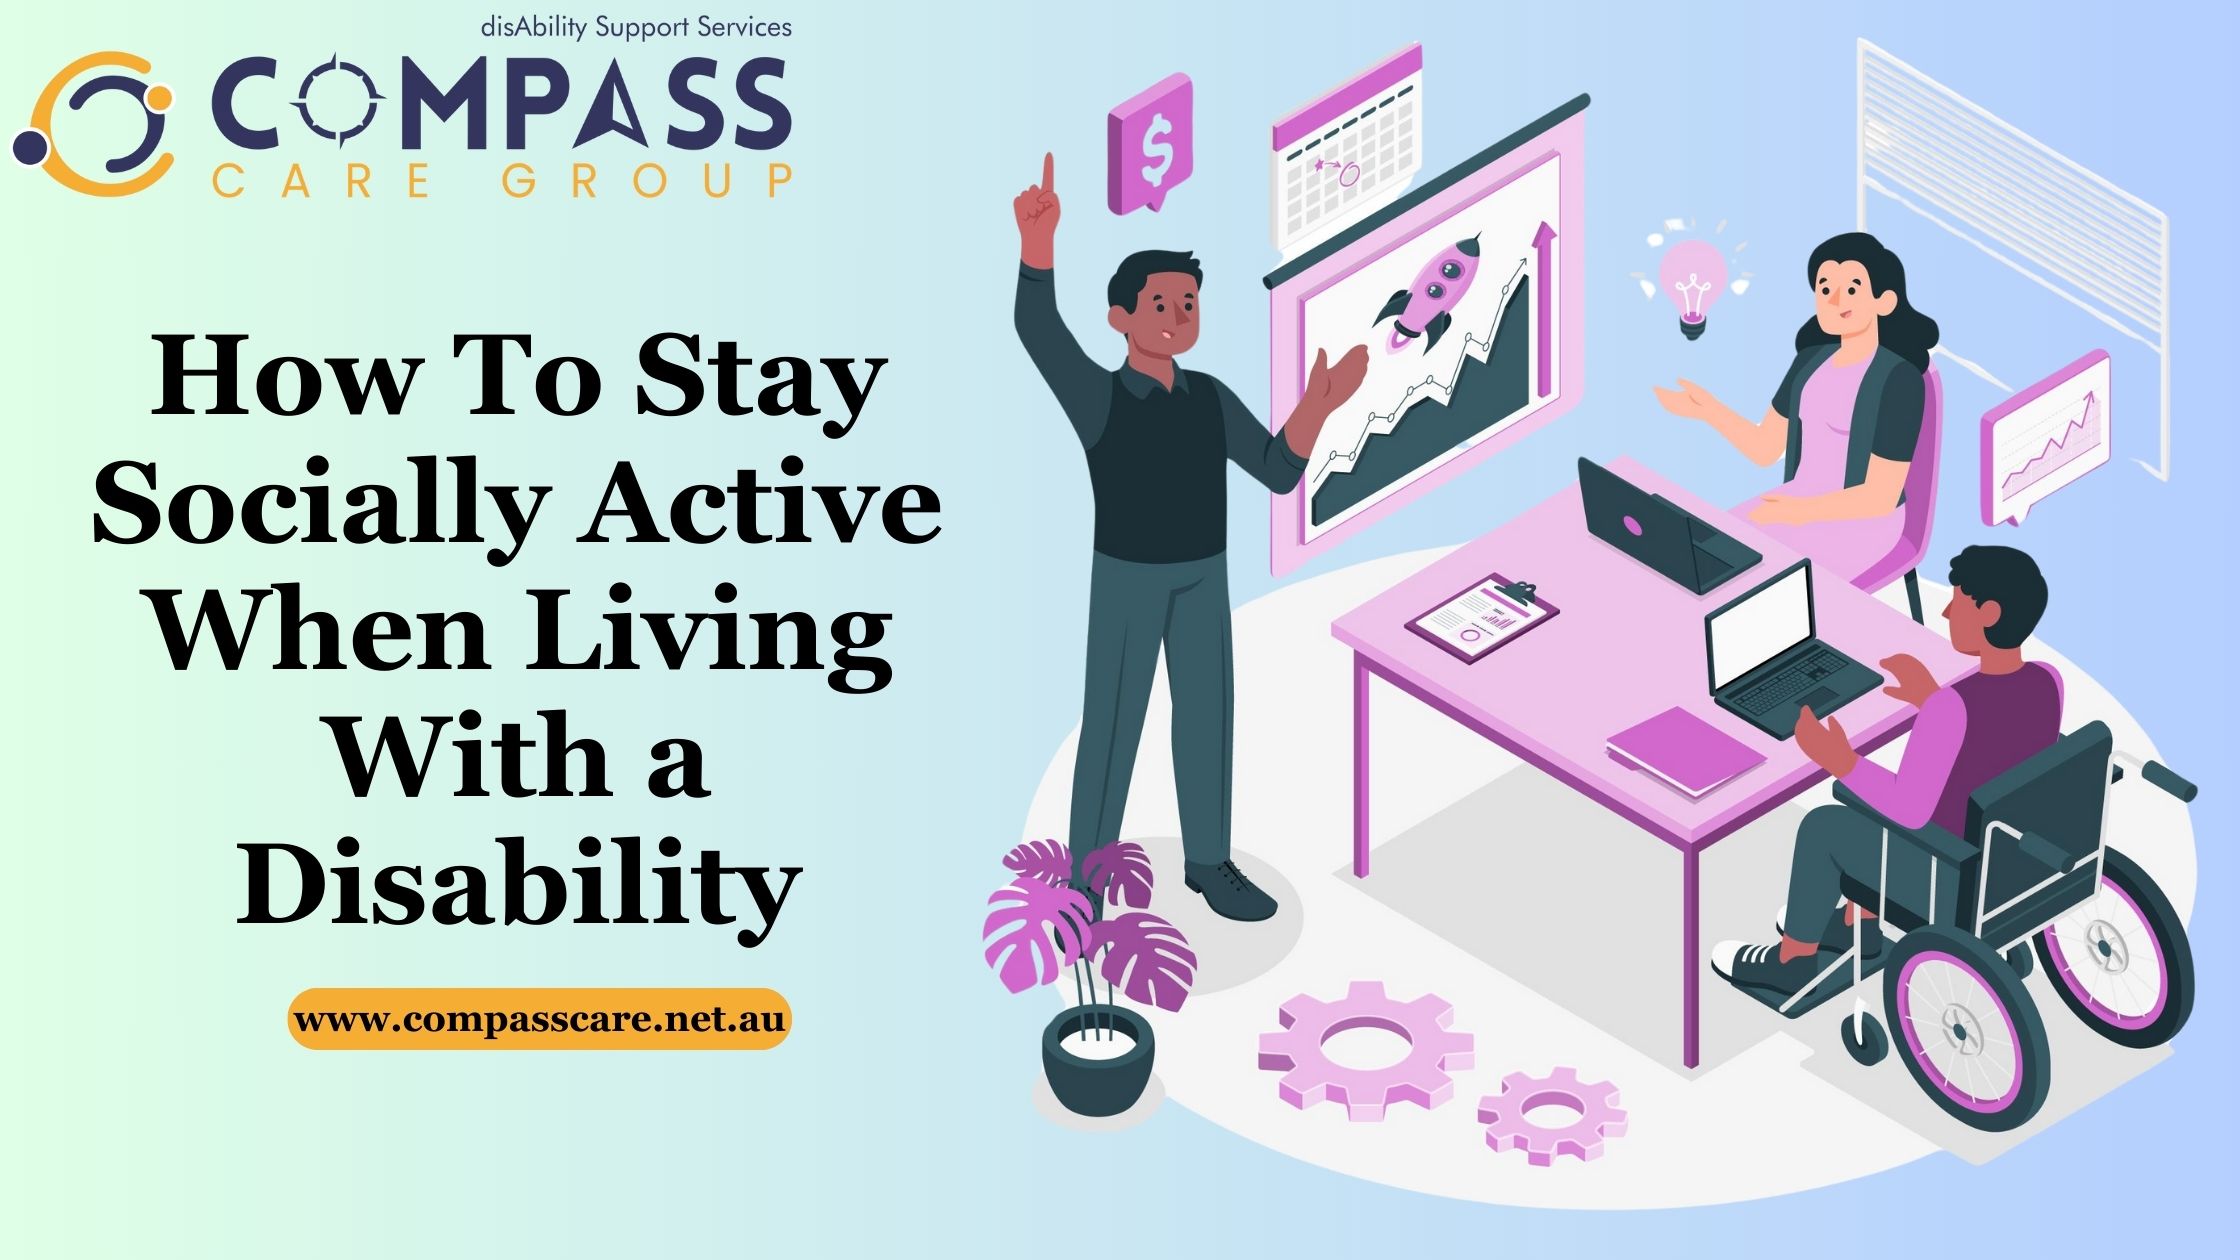 How To Stay Socially Active When Living With a Disability